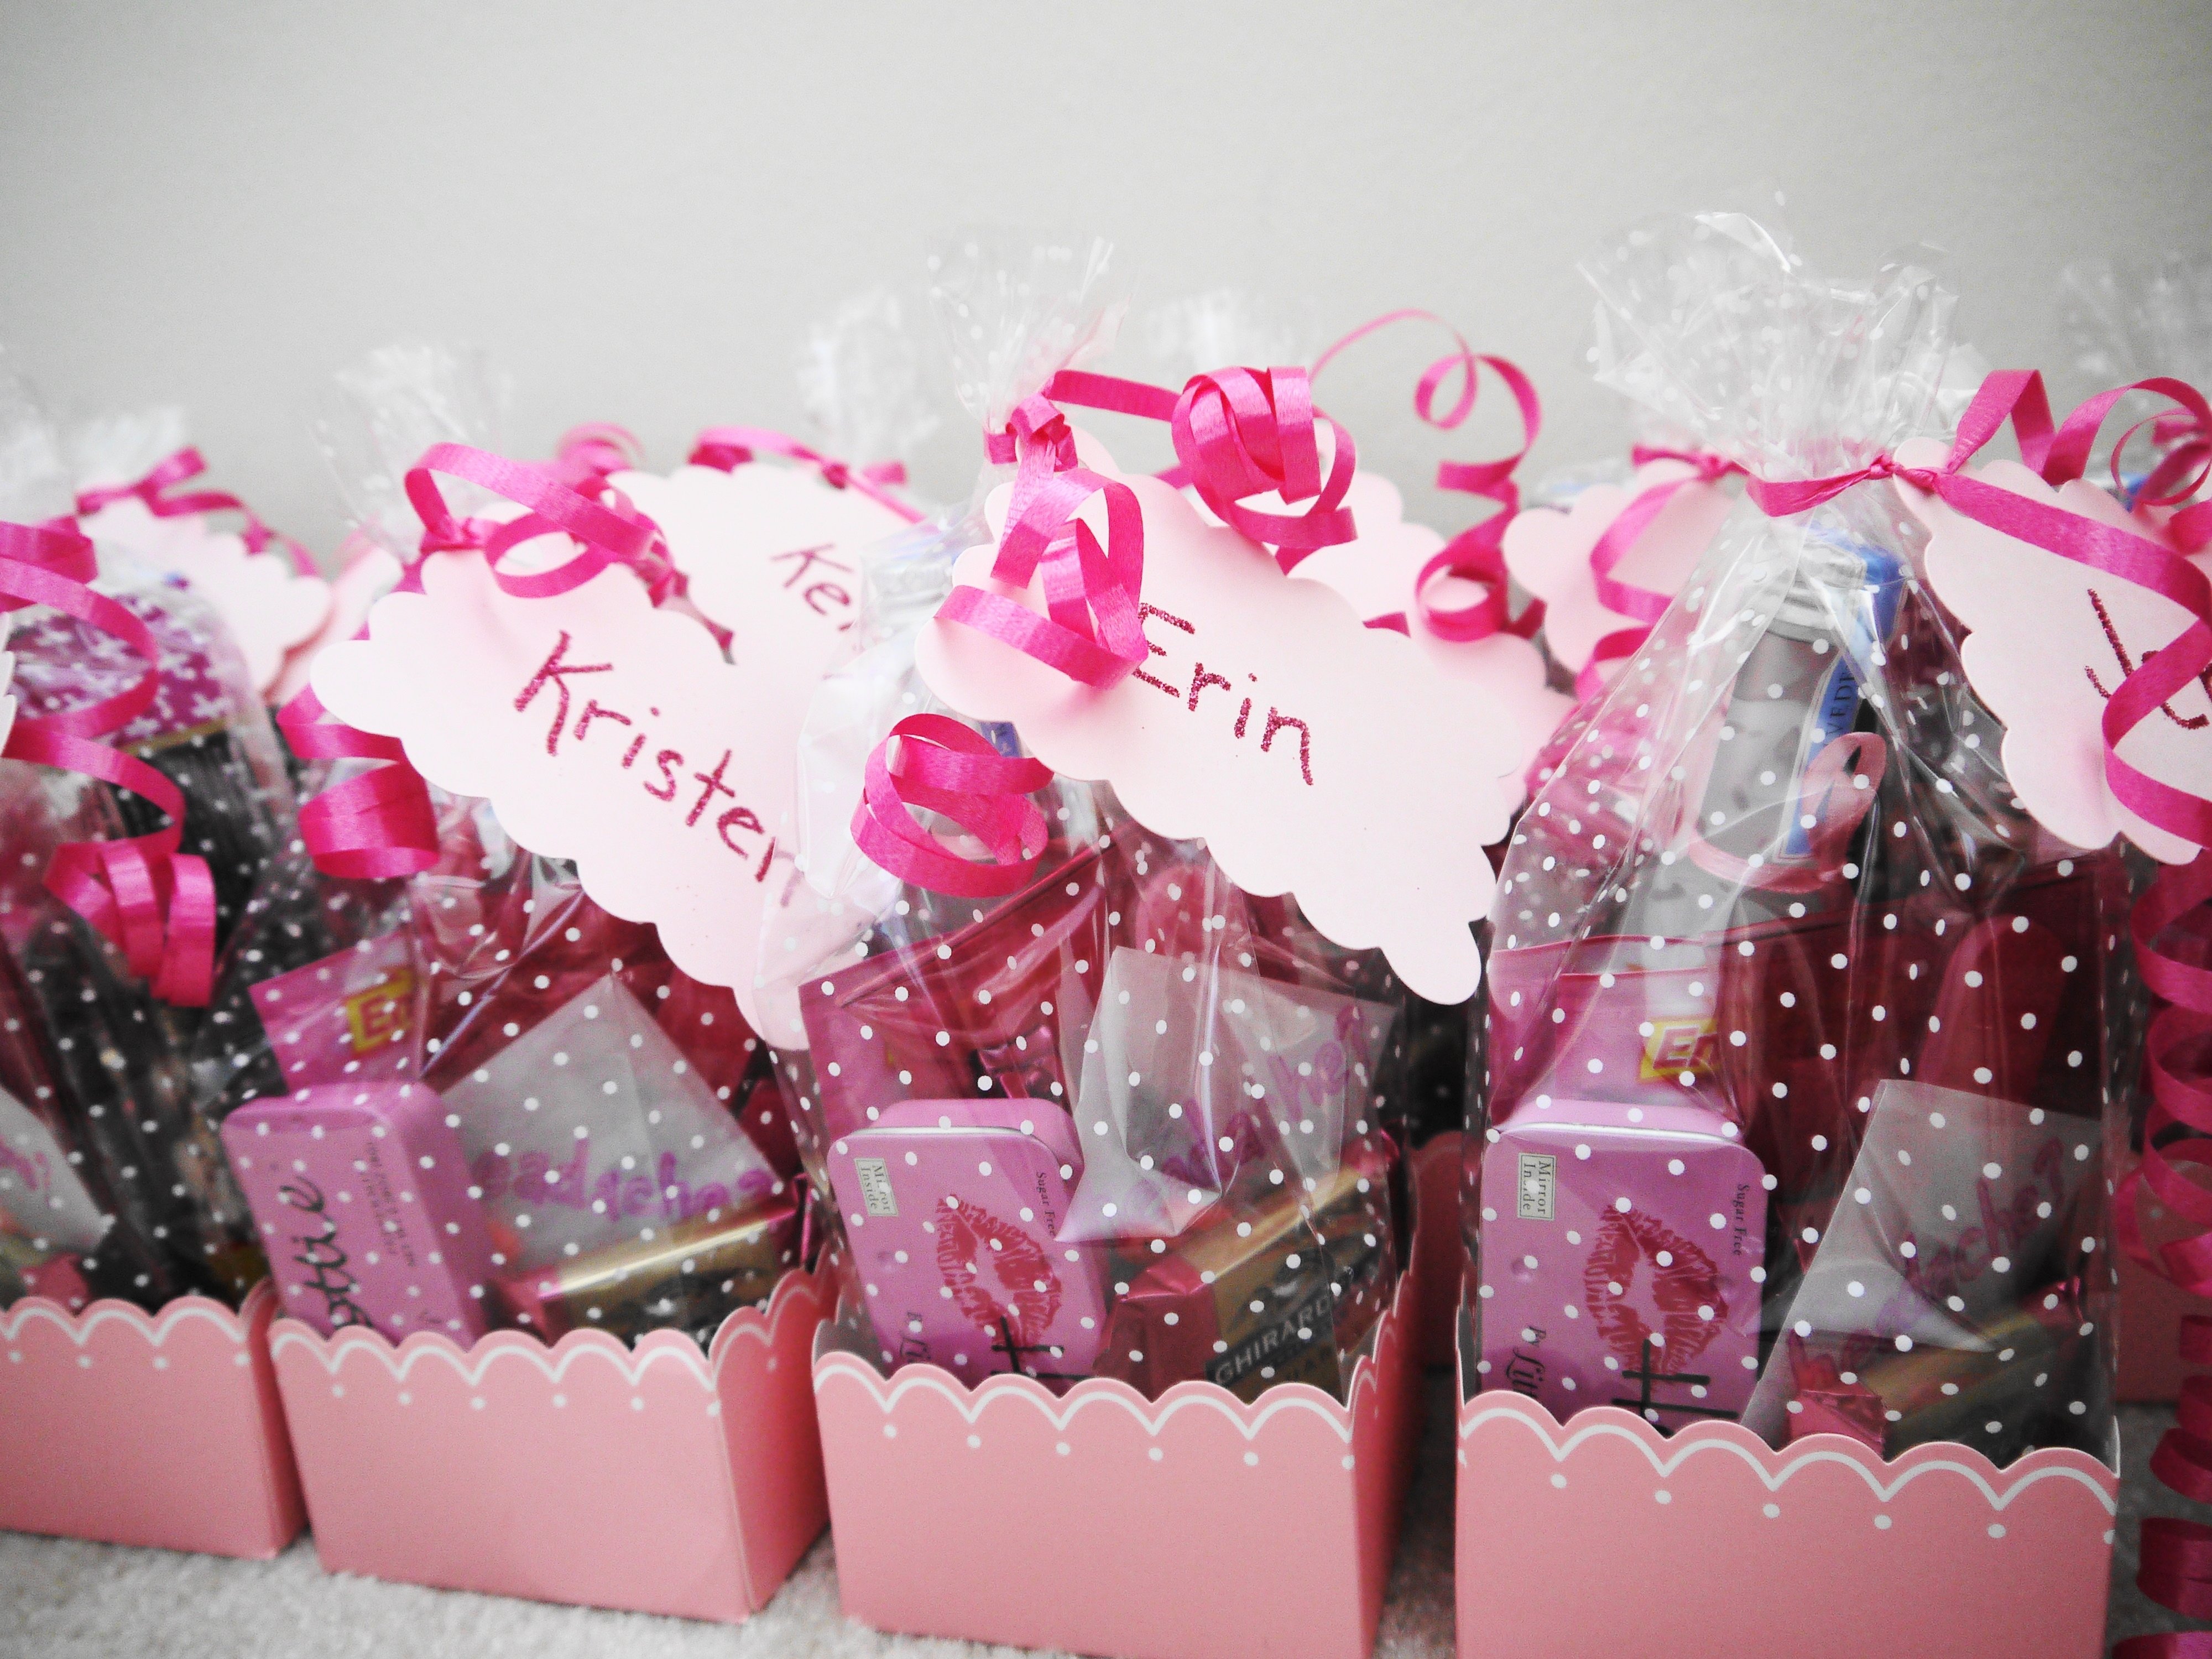 10 Awesome Bachelorette Party Gift Bag Ideas.